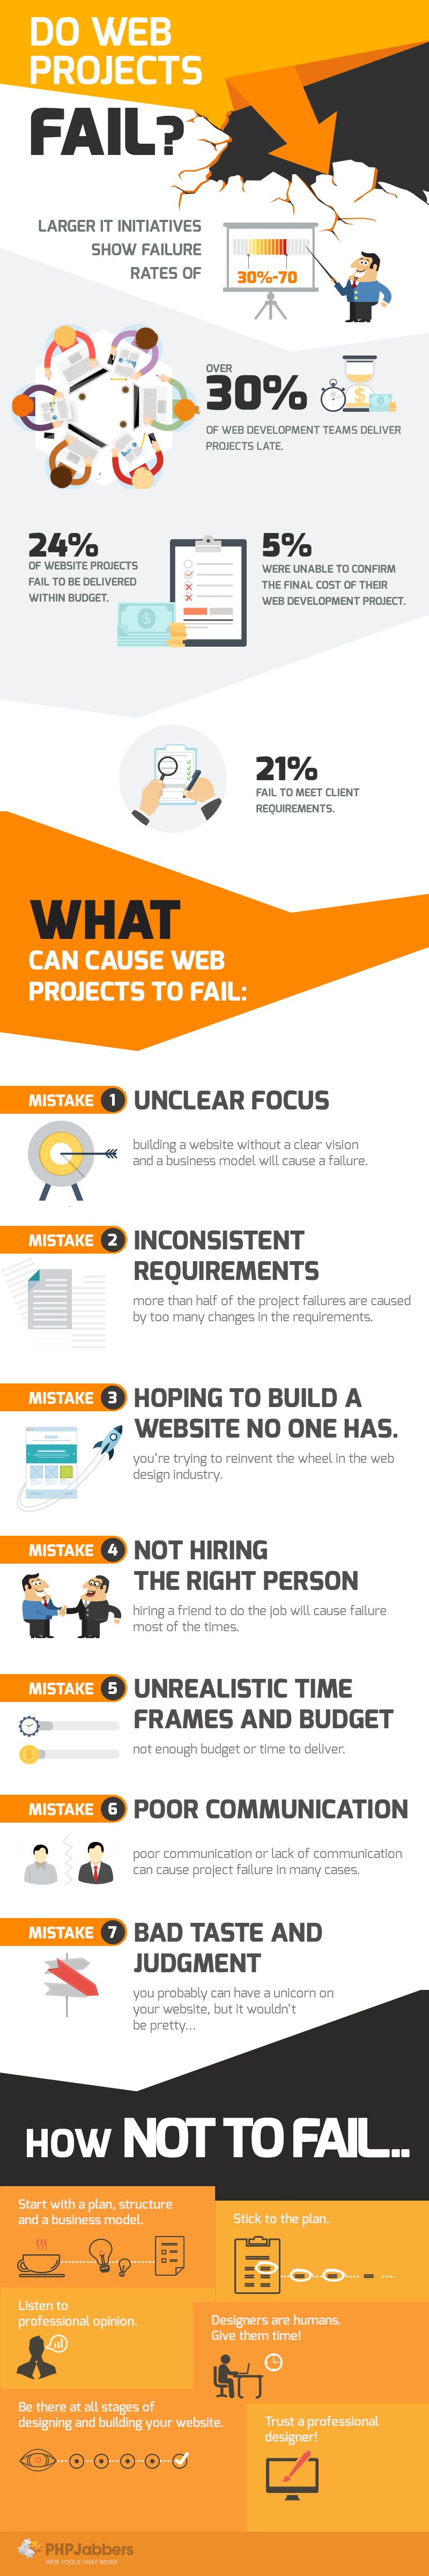 Reasons A Web Project Fails by PHPjabbers.com